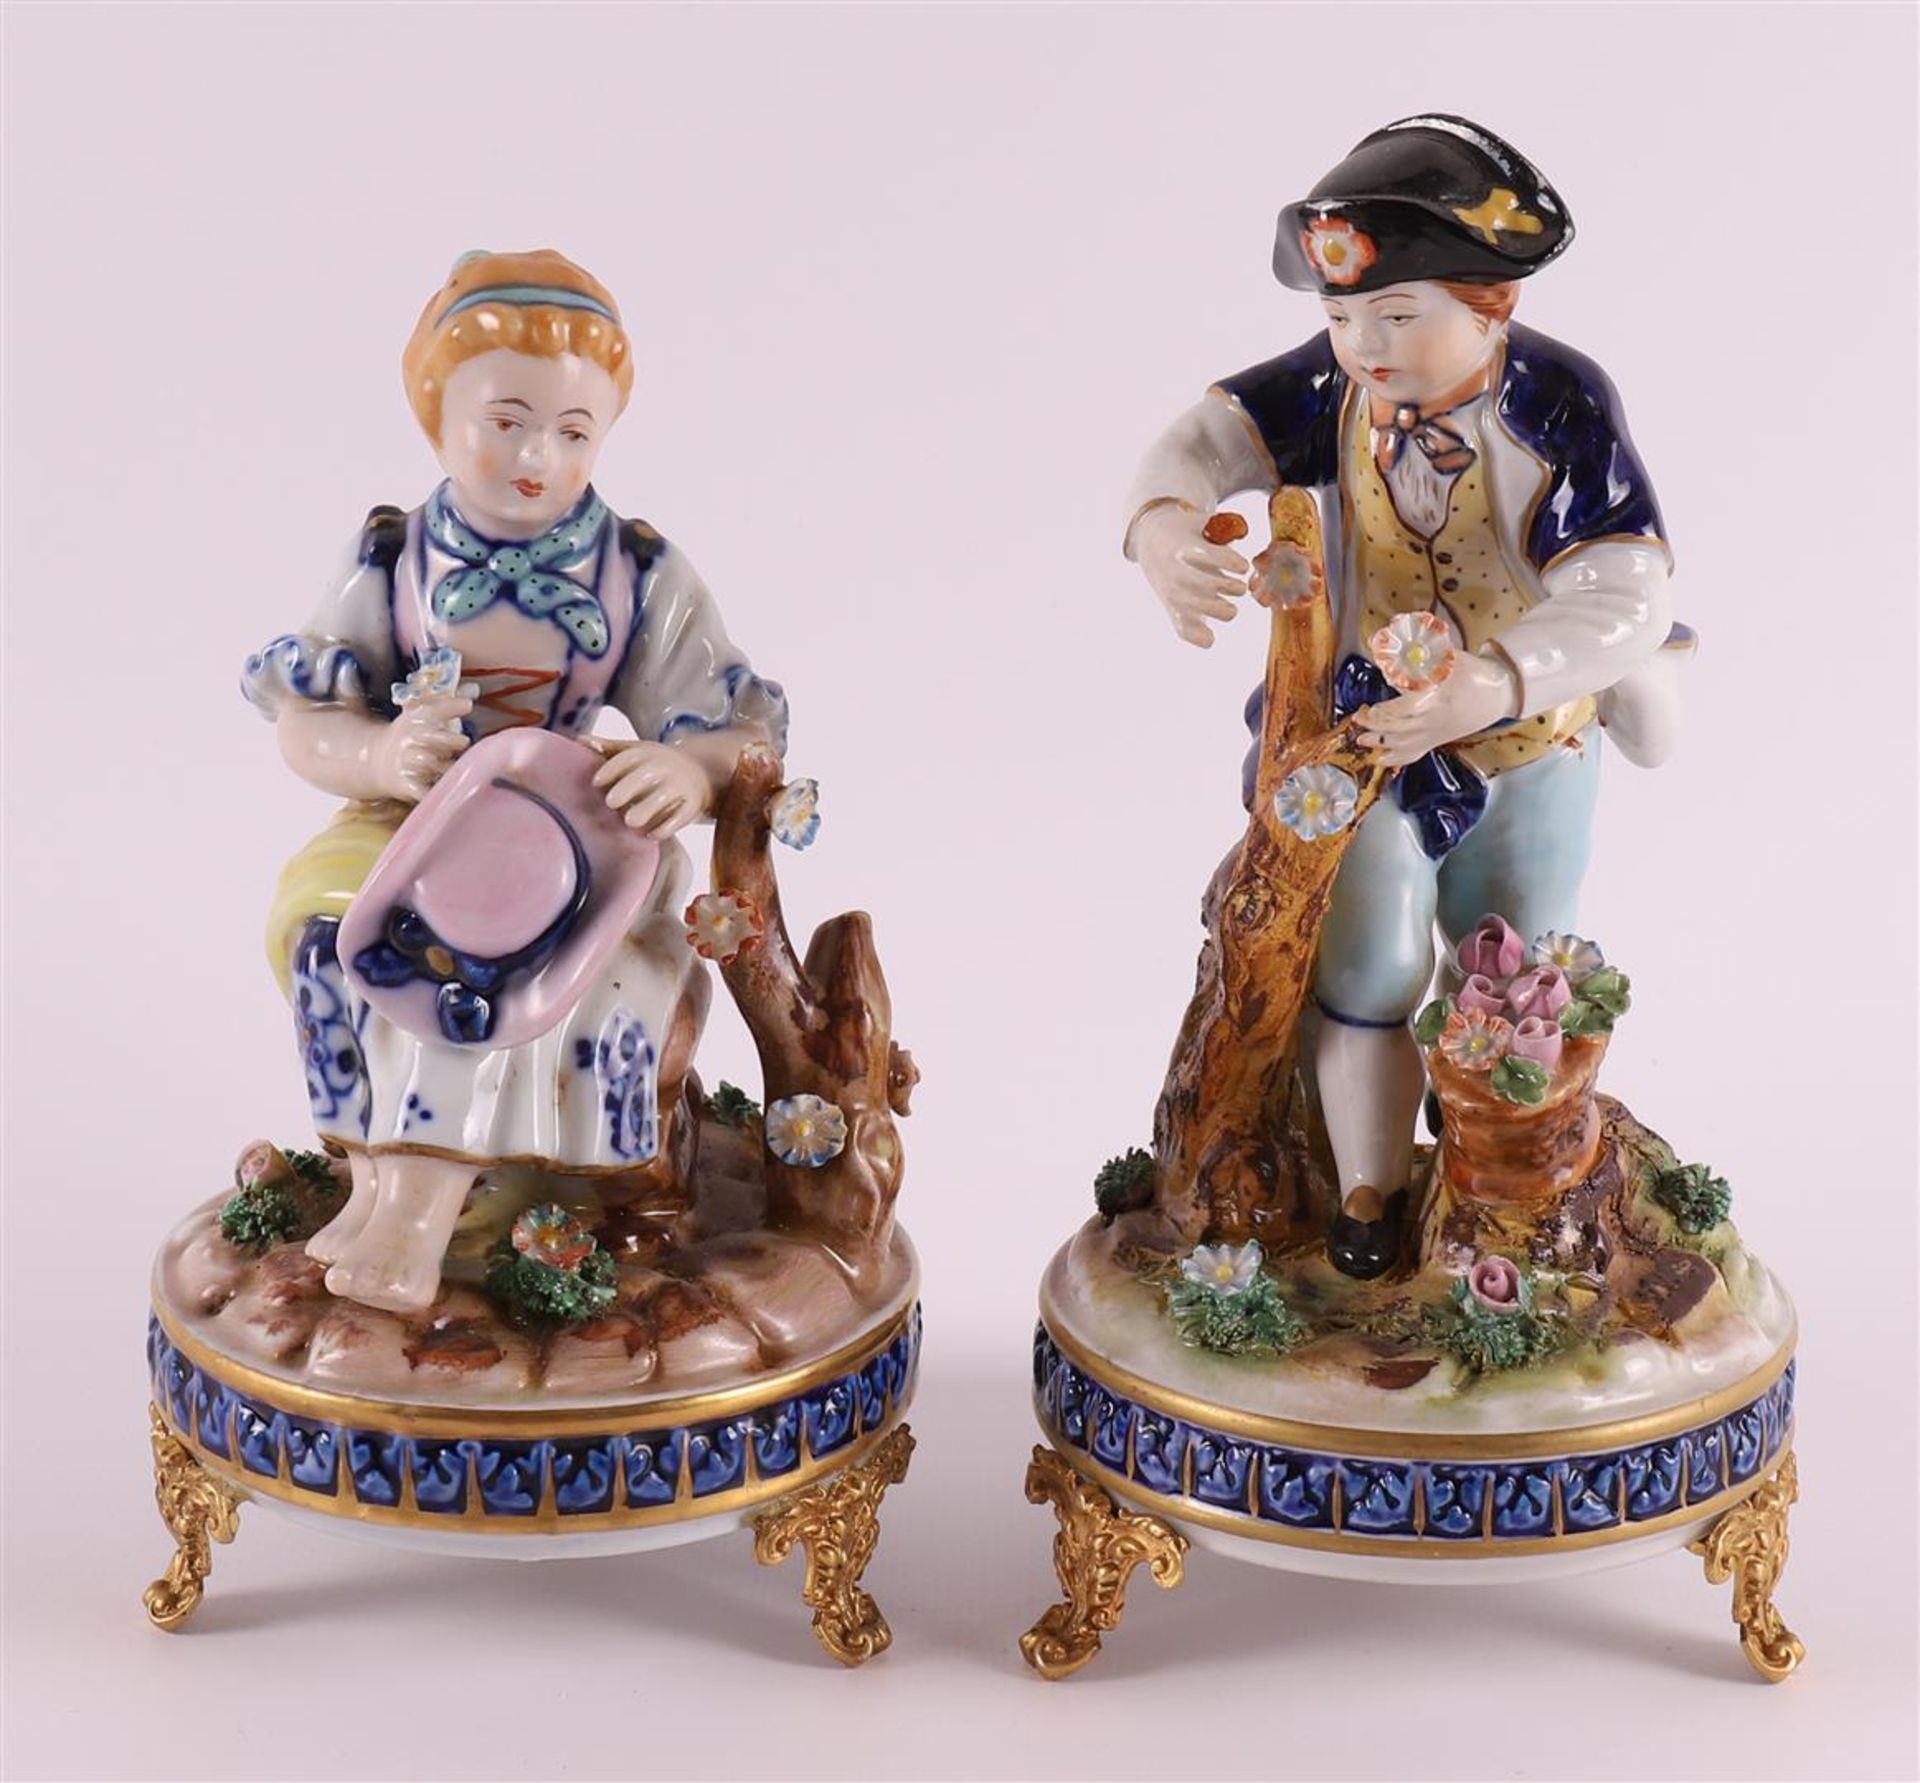 A pair of polychrome porcelain sculpture groups of a young man and young woman, France, probably